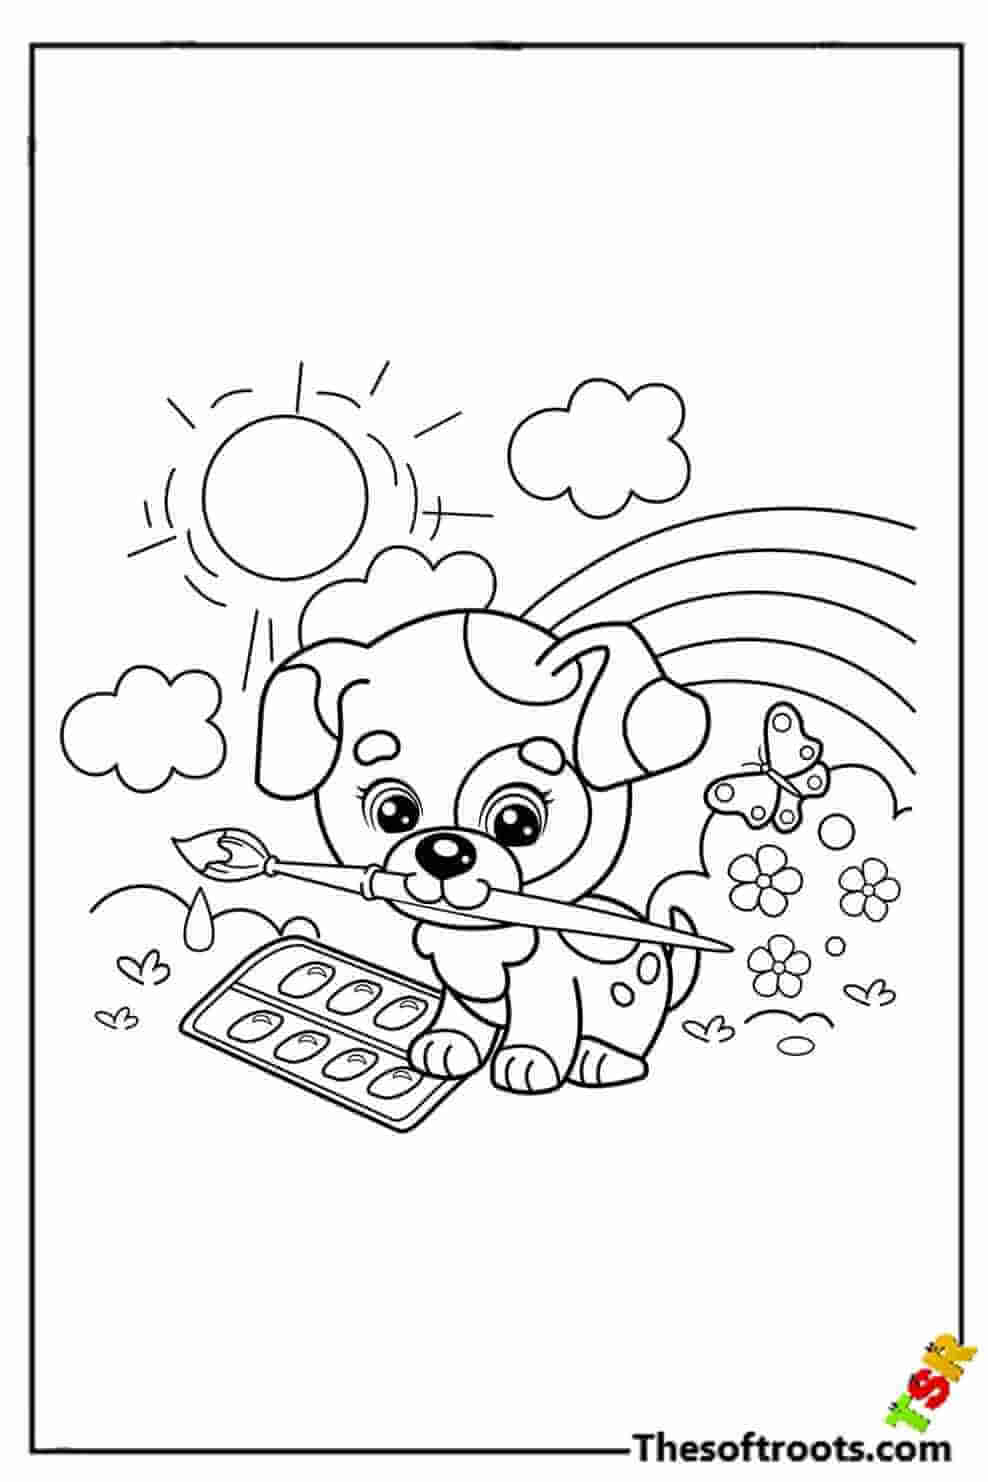 Puppy to color coloring pages